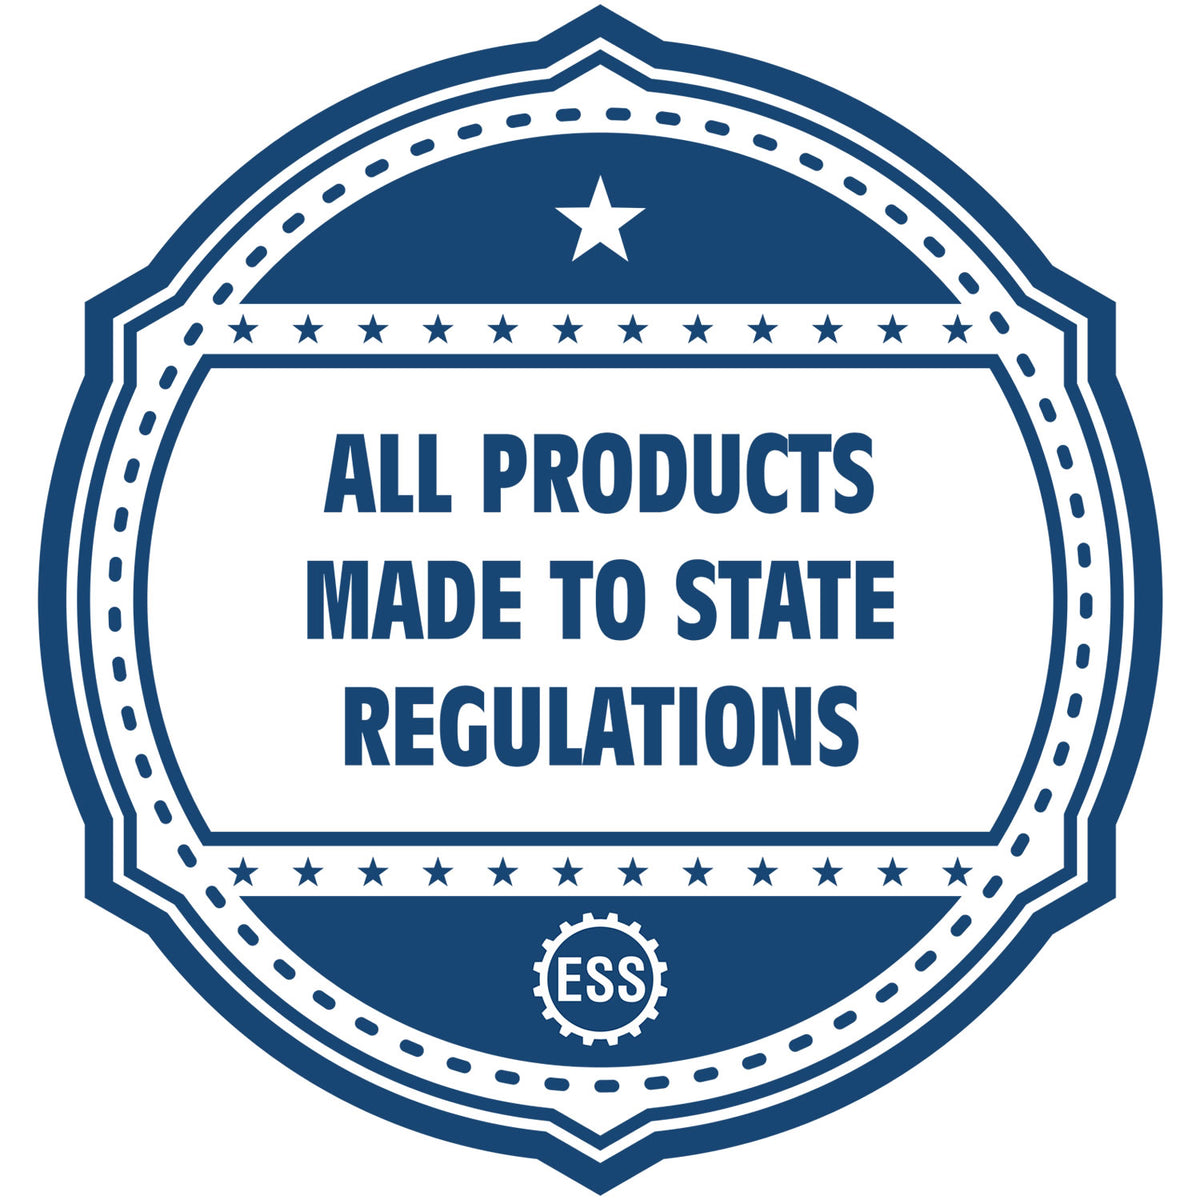 An icon or badge element for the Slim Pre-Inked Guam Architect Seal Stamp showing that this product is made in compliance with state regulations.